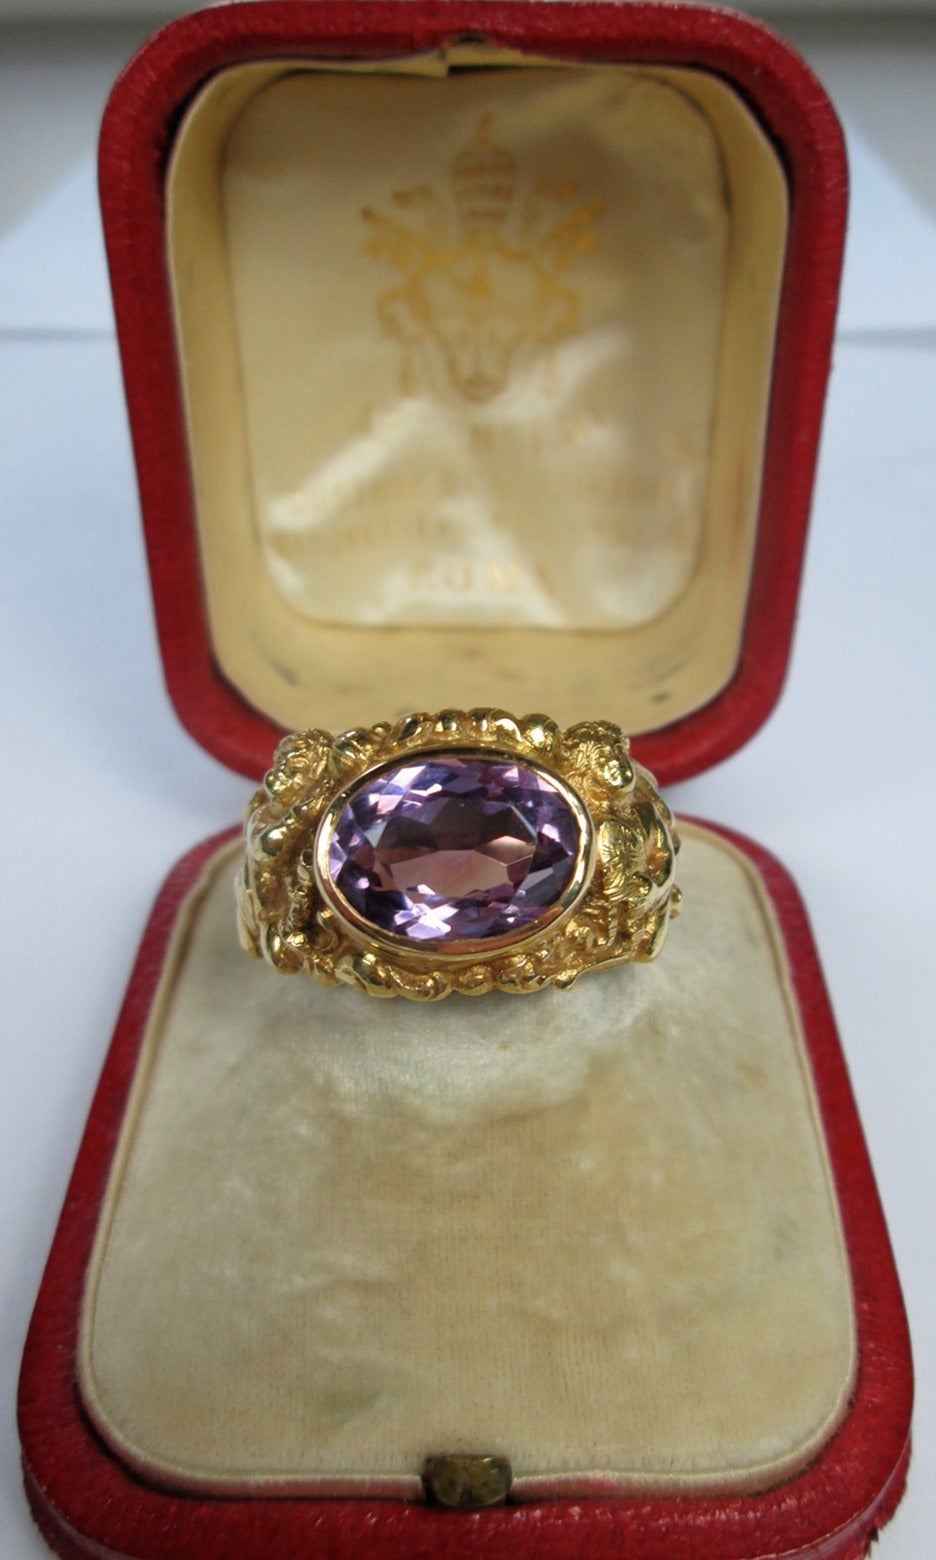 This ring is designed out of with an oval faceted collet set amethyst.
The 18Kt chased setting decorated with puttis holding religious symbols cups and tiara

The ring has been made during the Pope Leone XIII (Gioacchino Pecci) 1878-1903 reign.